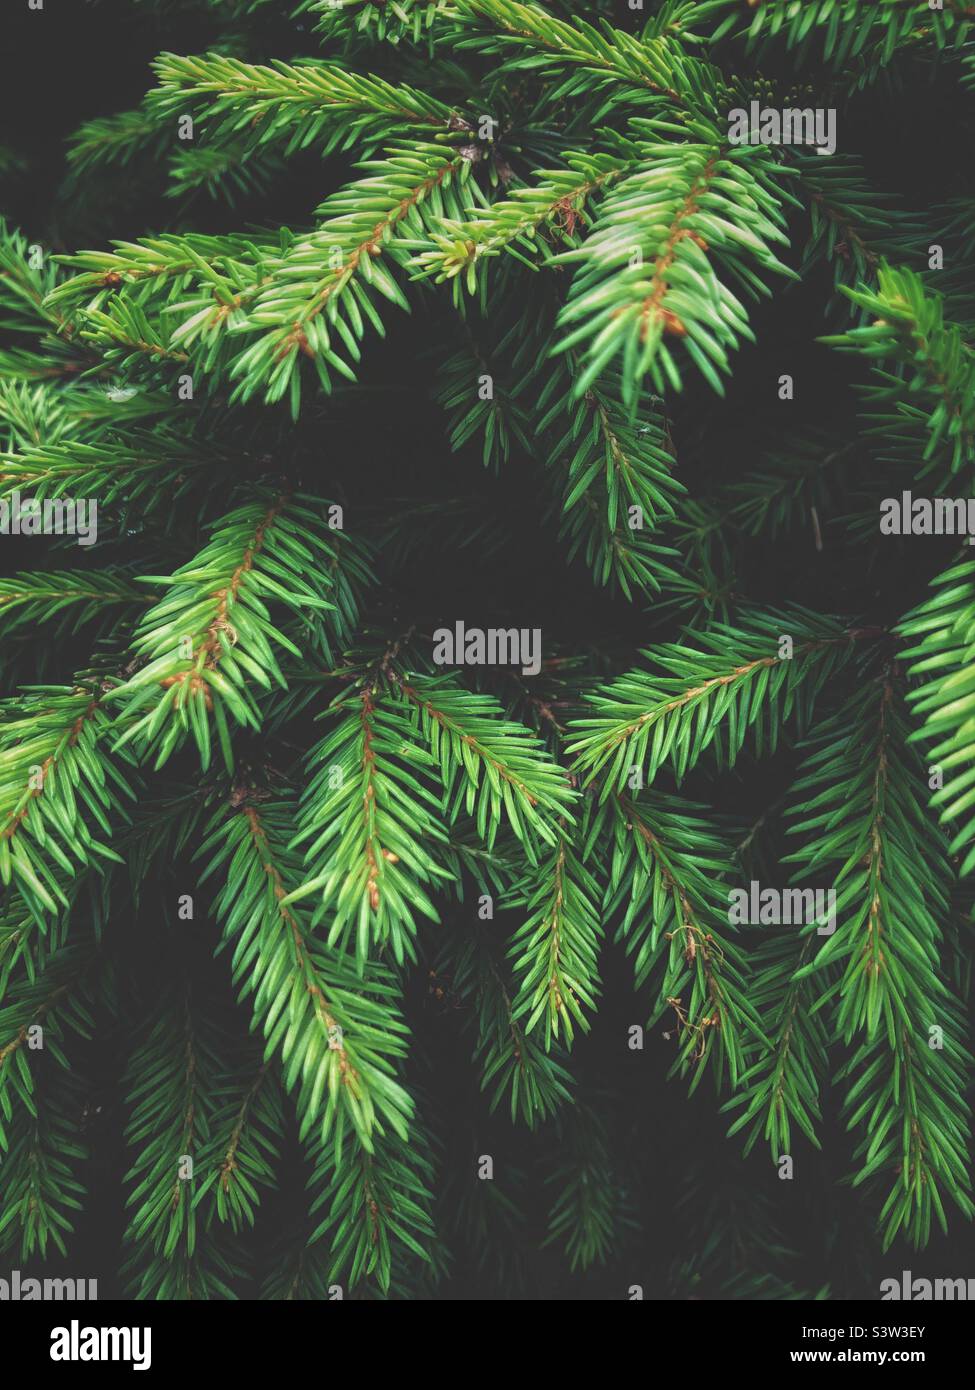 Full frame nature background of a close up of the leaves and branches of a fir or pine tree with copy space Stock Photo